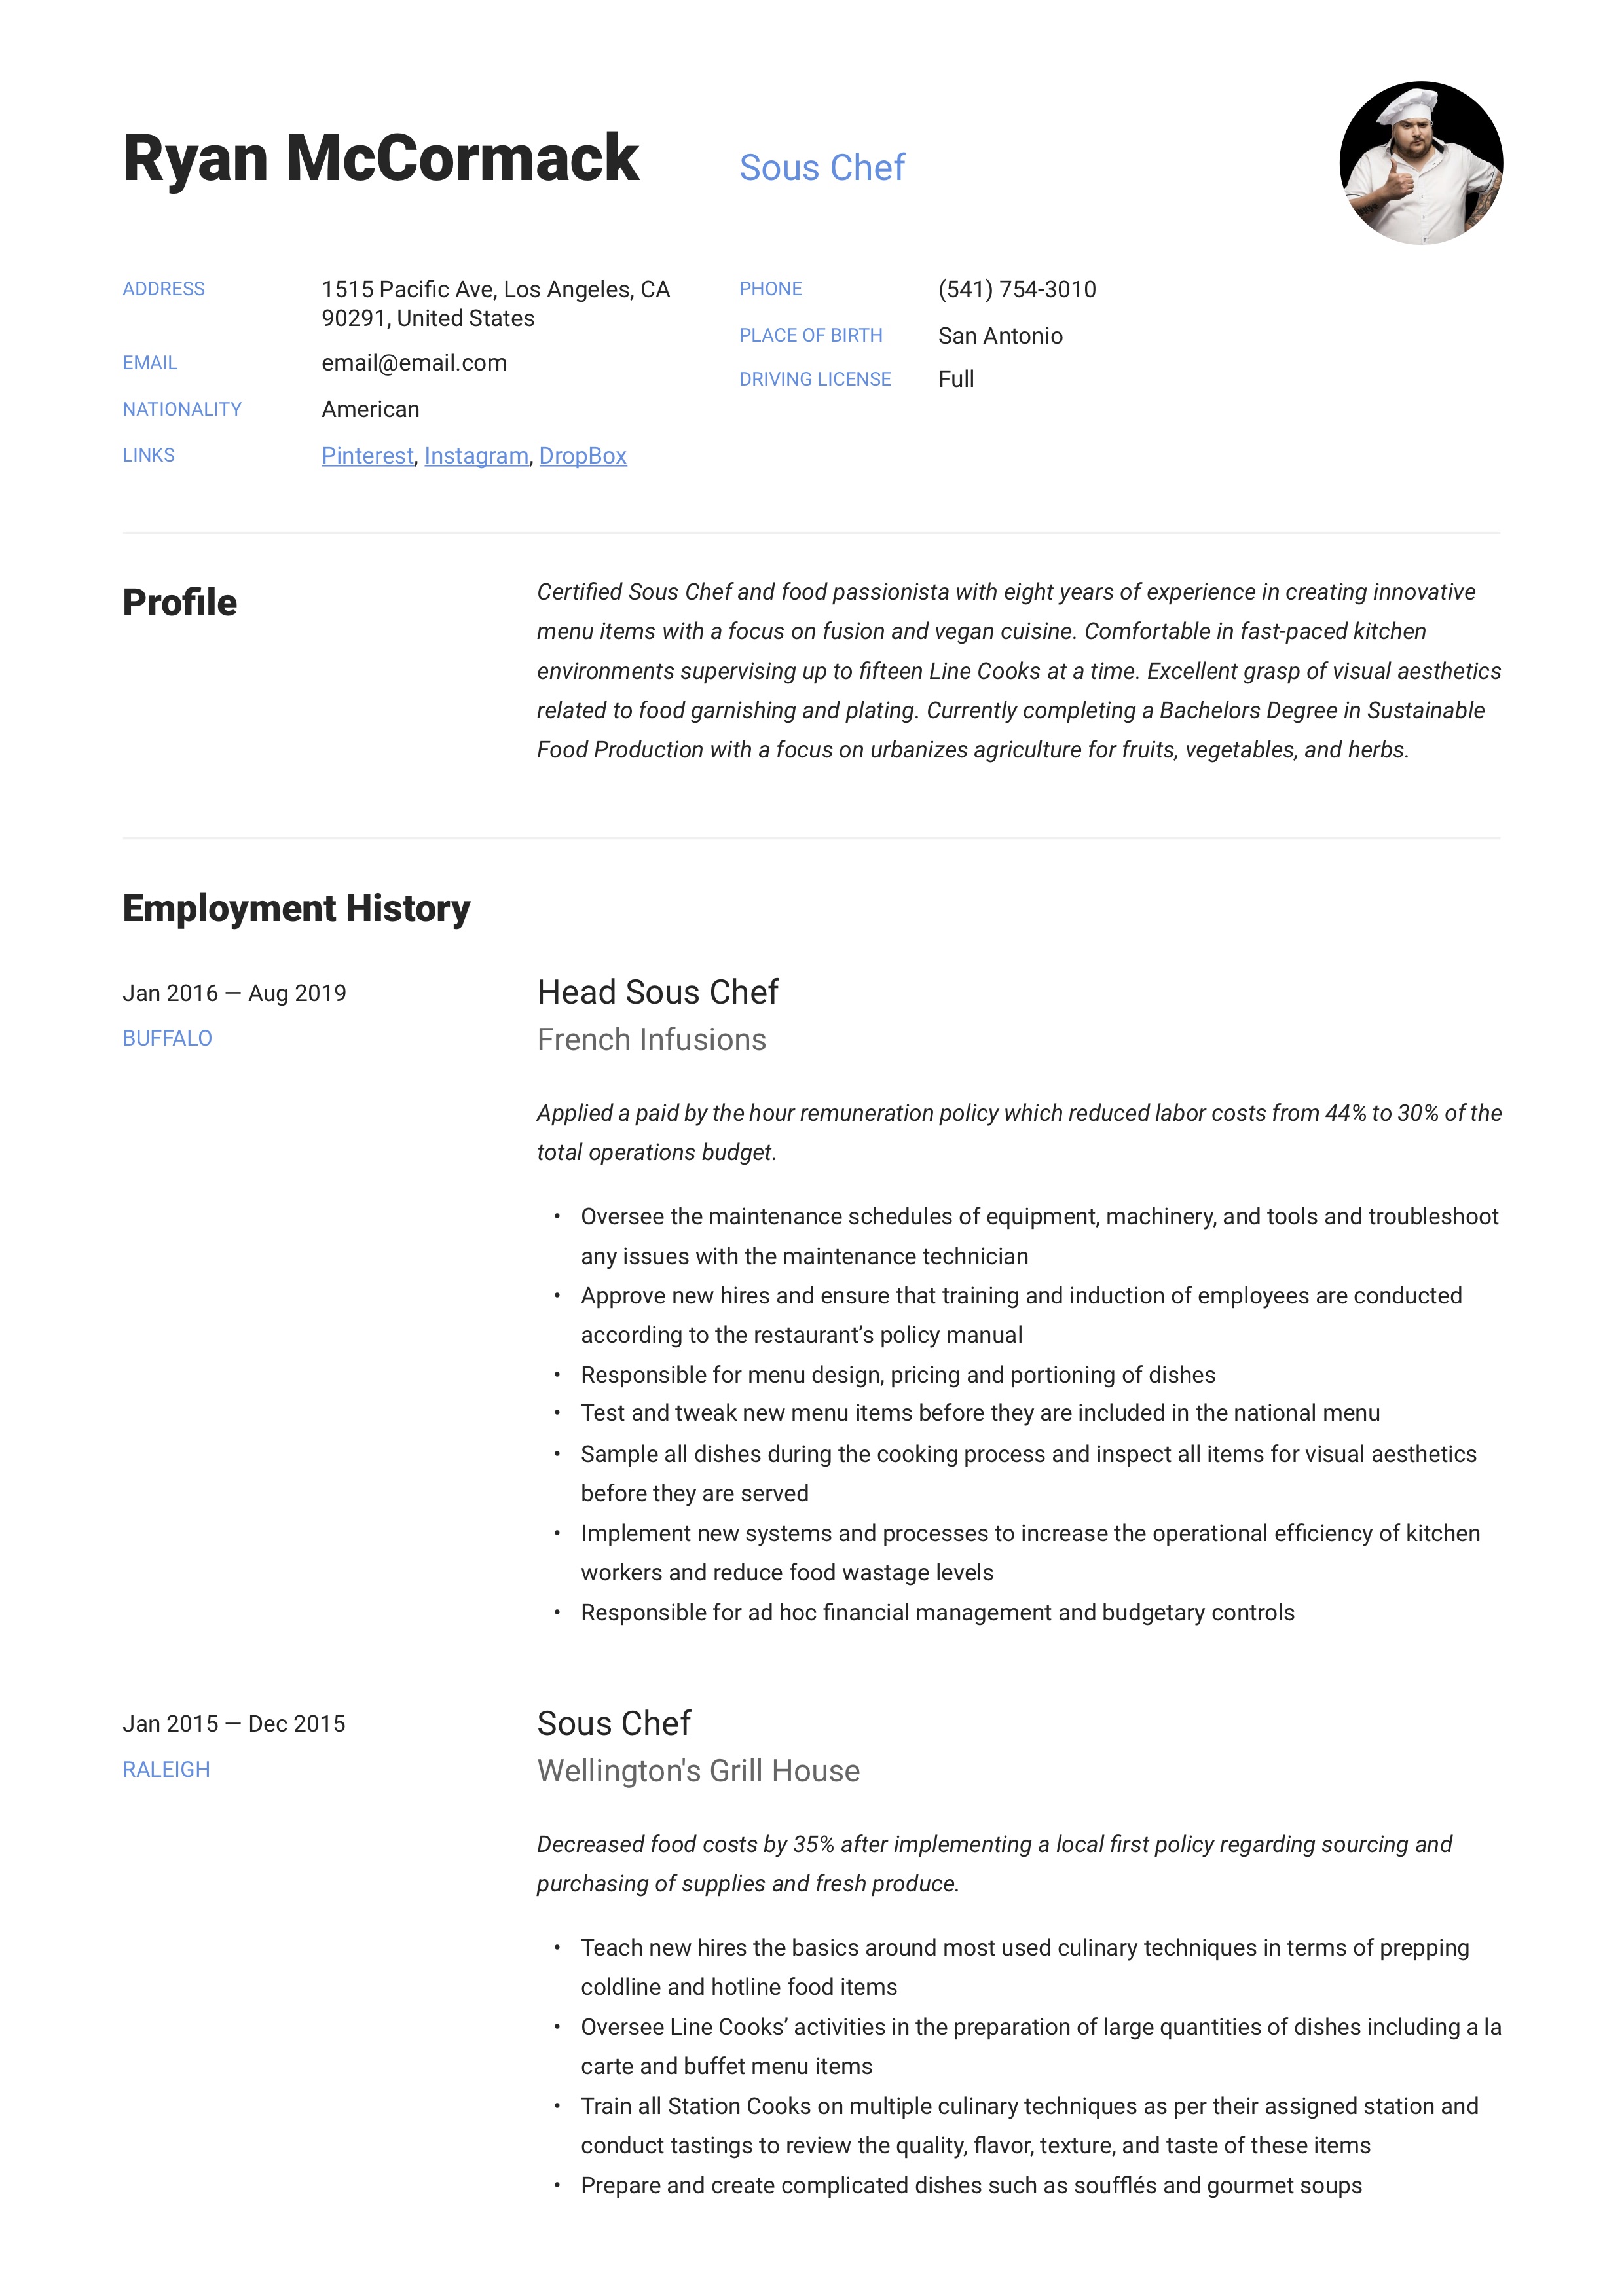 Resume Sample Sous Chef